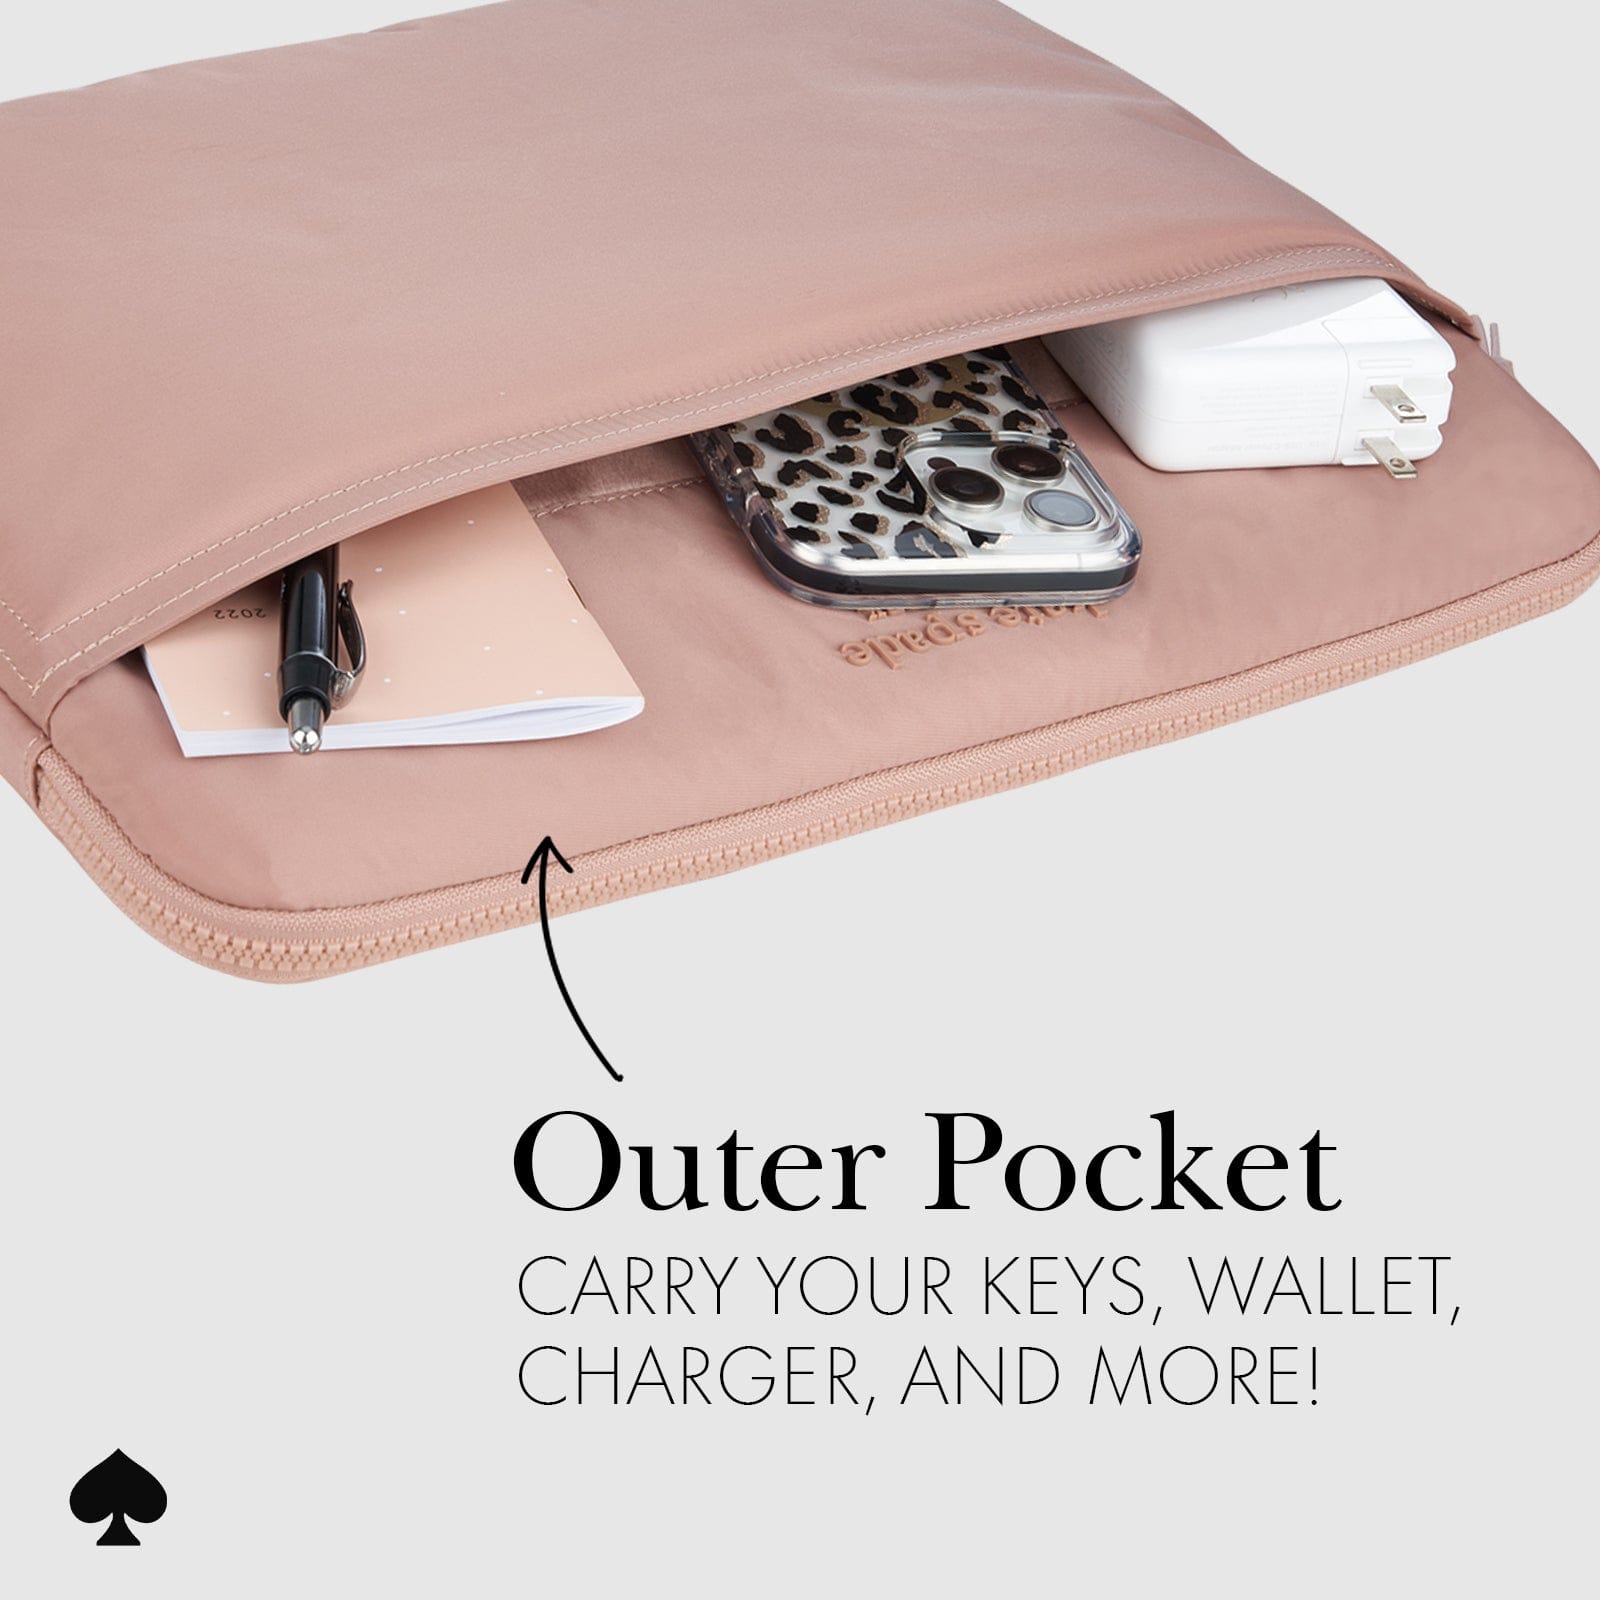 OUTER POCKET. CARRY YOUR KEYS, WALLET, CHARGER AND MORE!